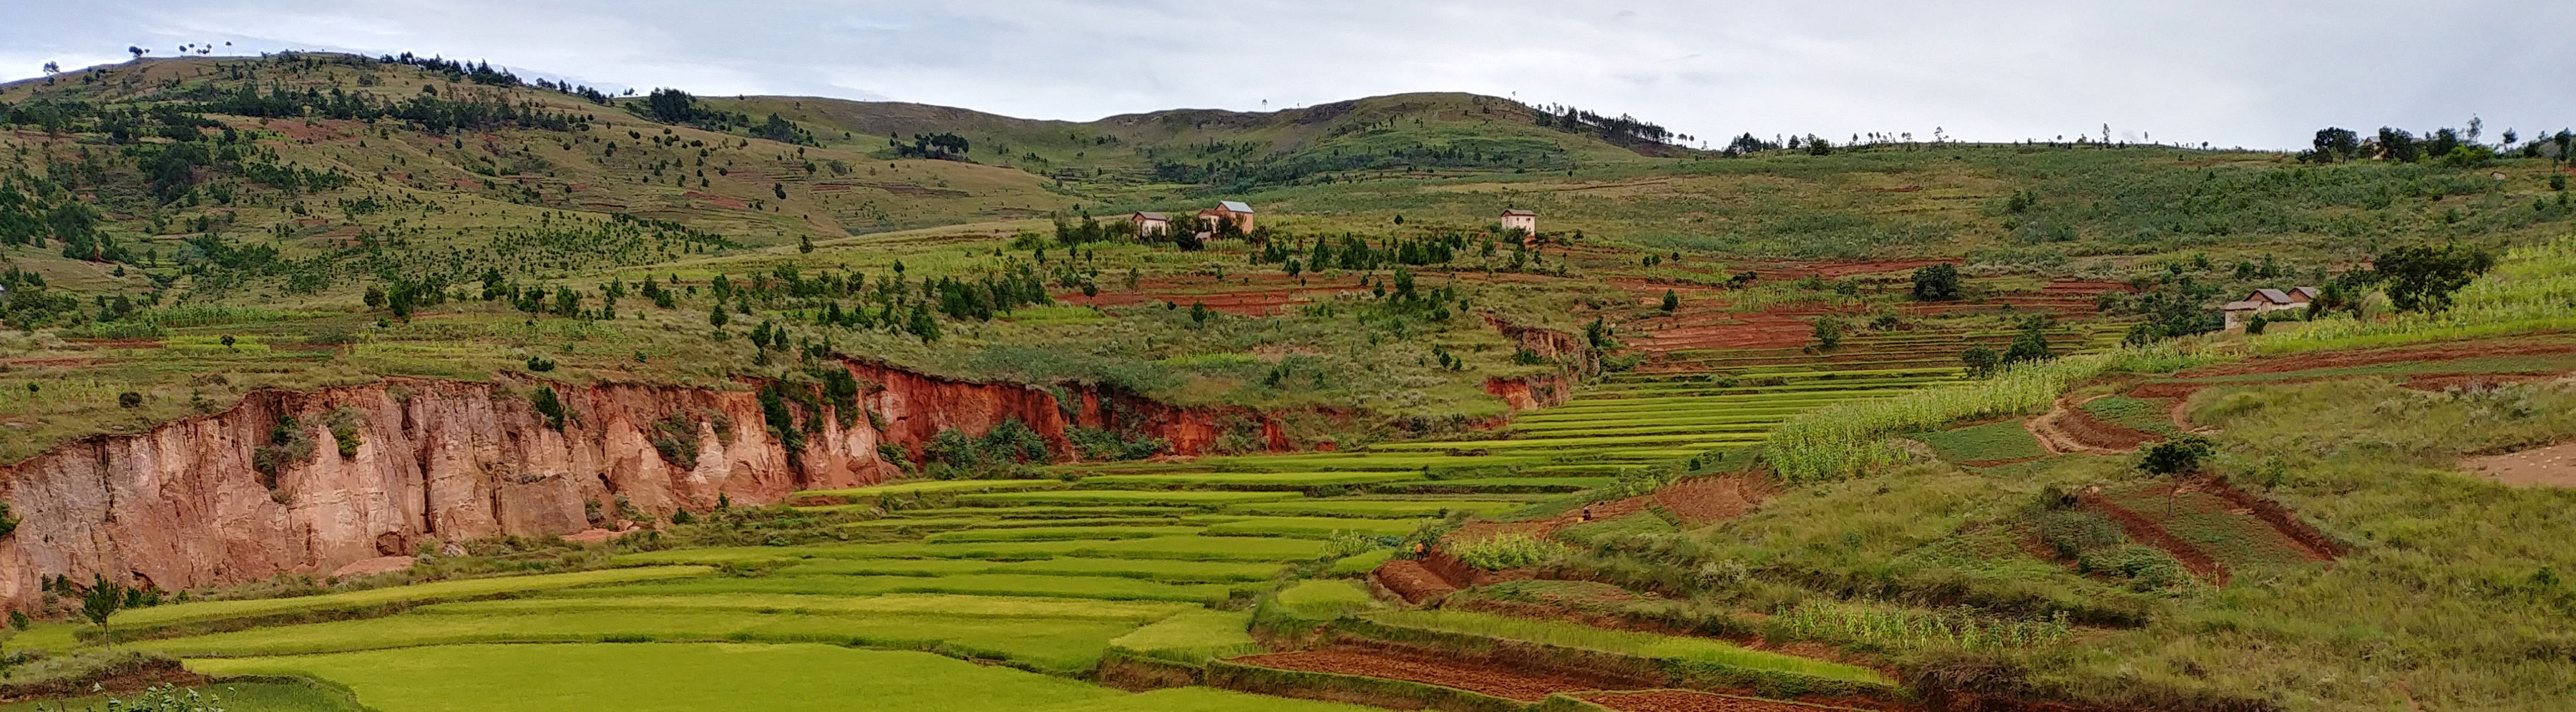 Terraces of green grass in Madagascar